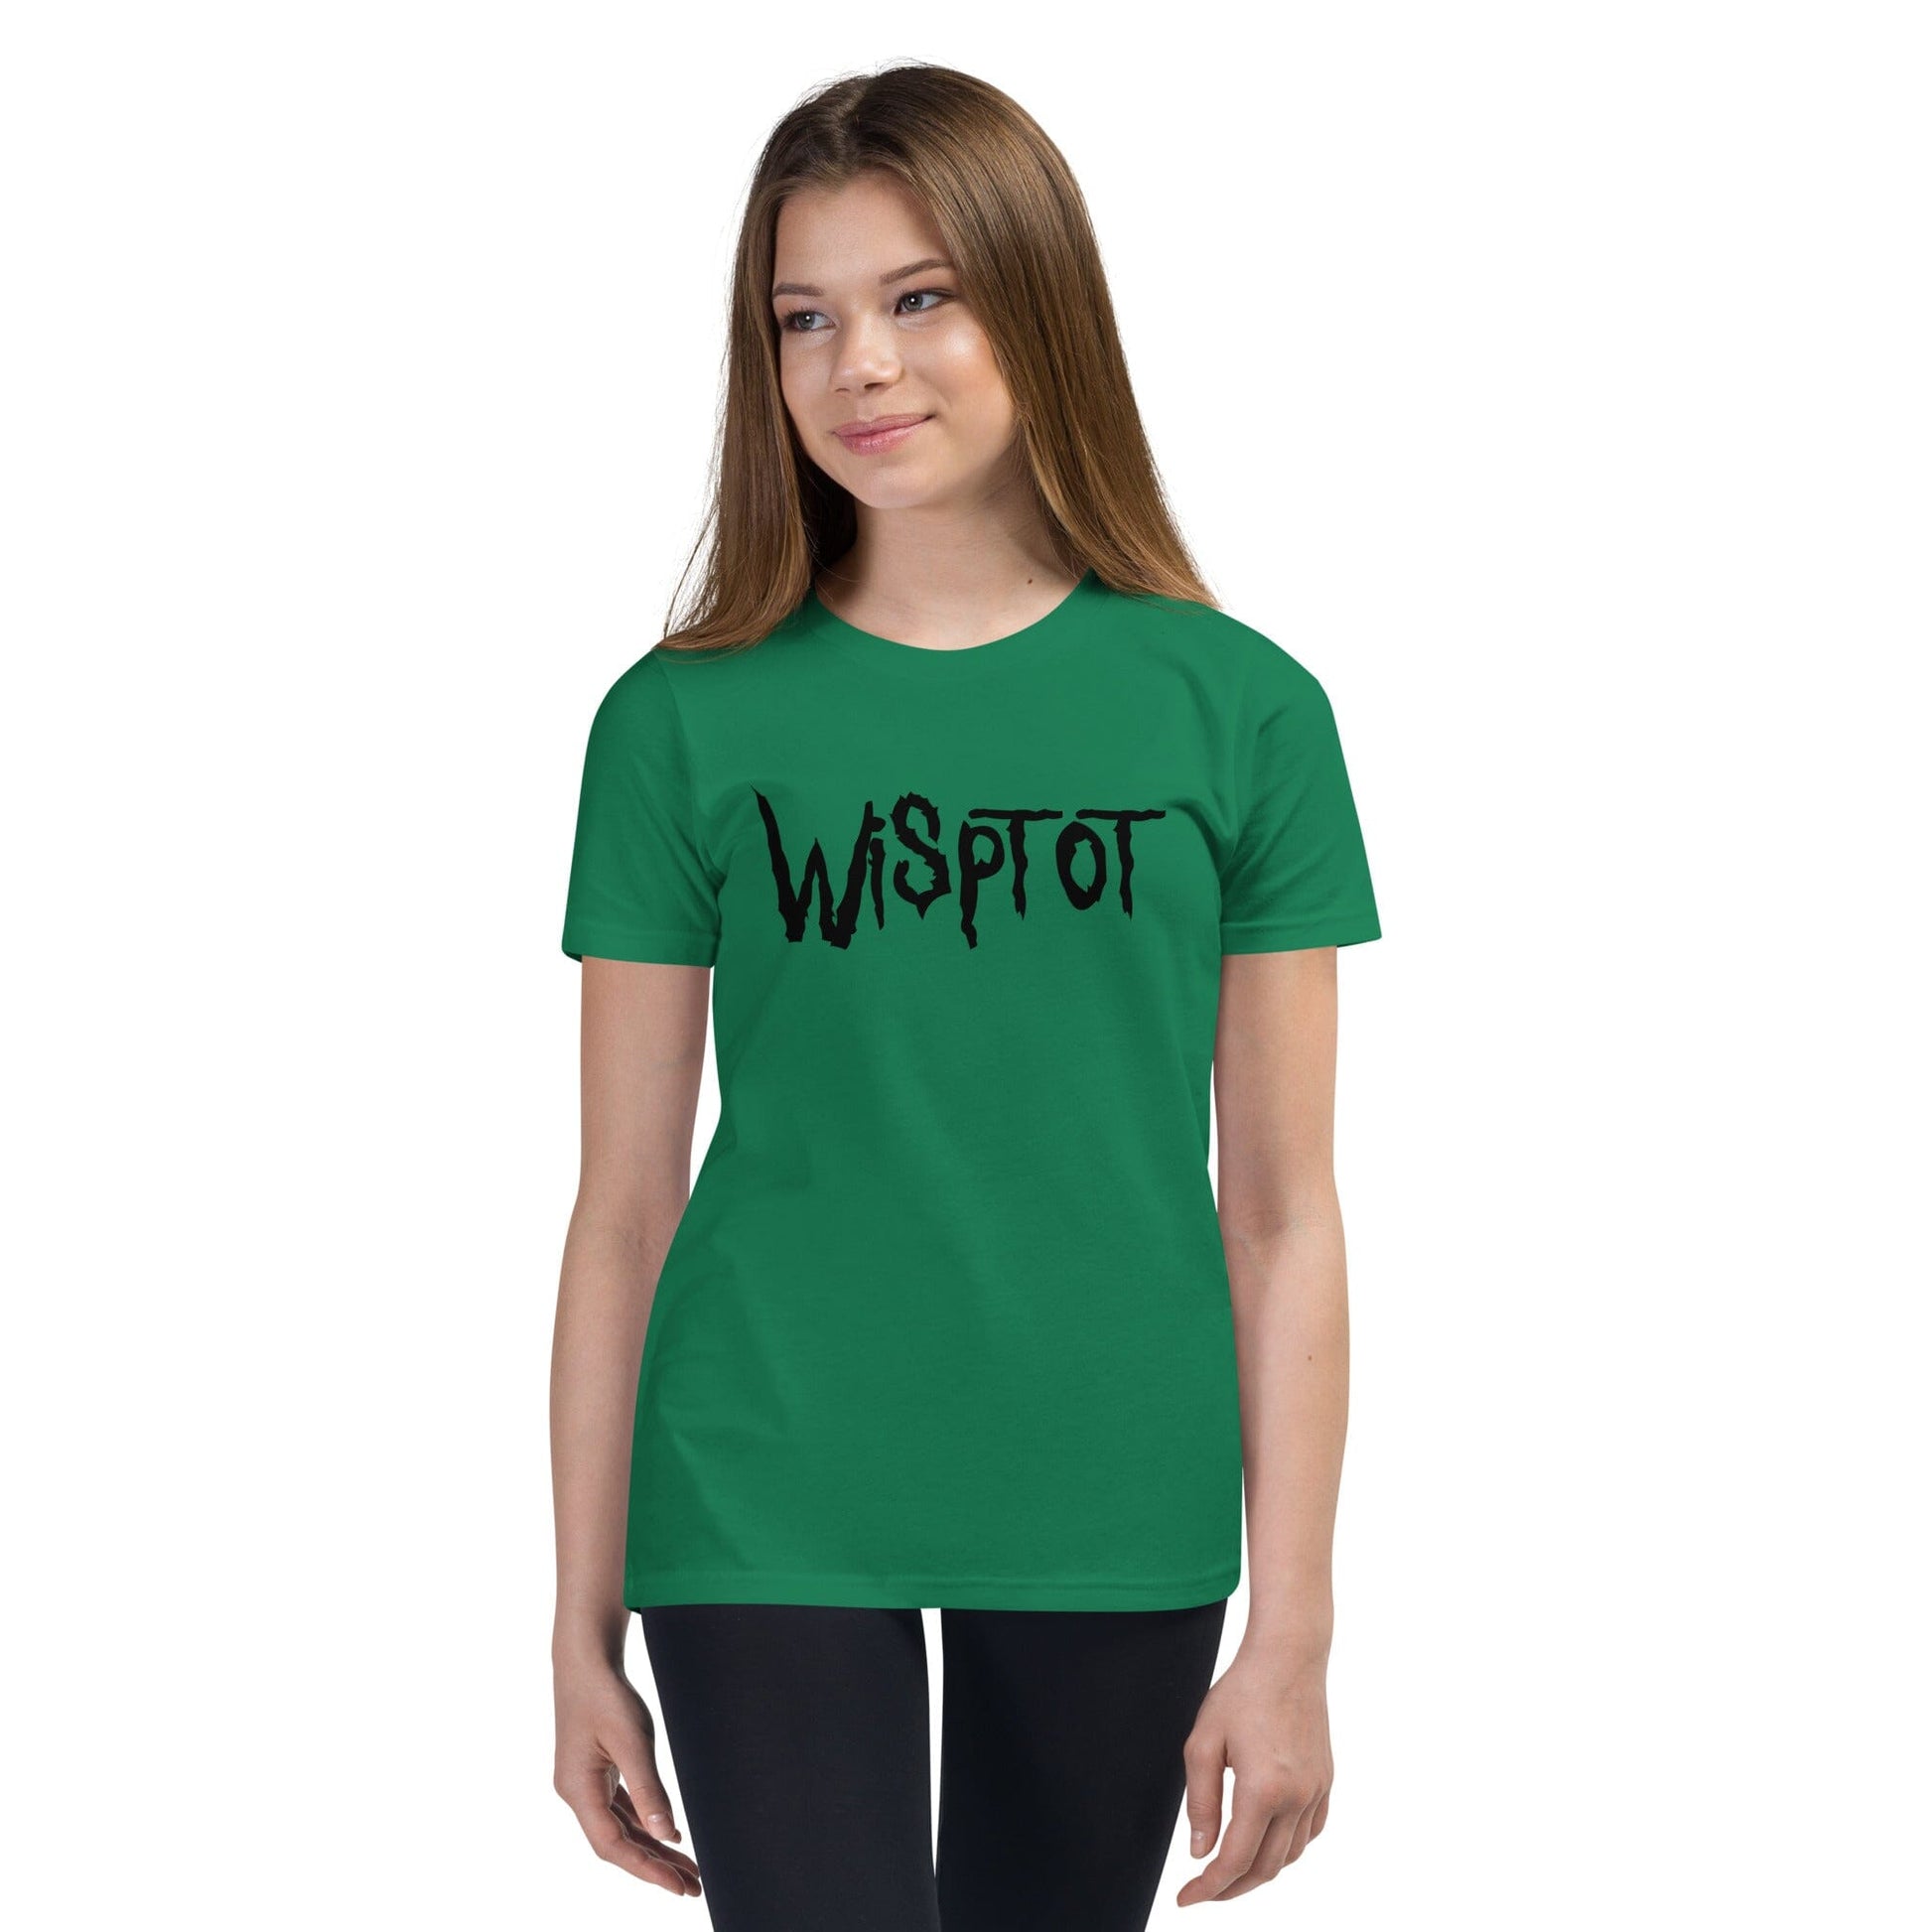 WispTot YOUTH T-Shirt [Unfoiled] (All net proceeds go to equally to Kitty CrusAIDe and Rags to Riches Animal Rescue) JoyousJoyfulJoyness Kelly S 